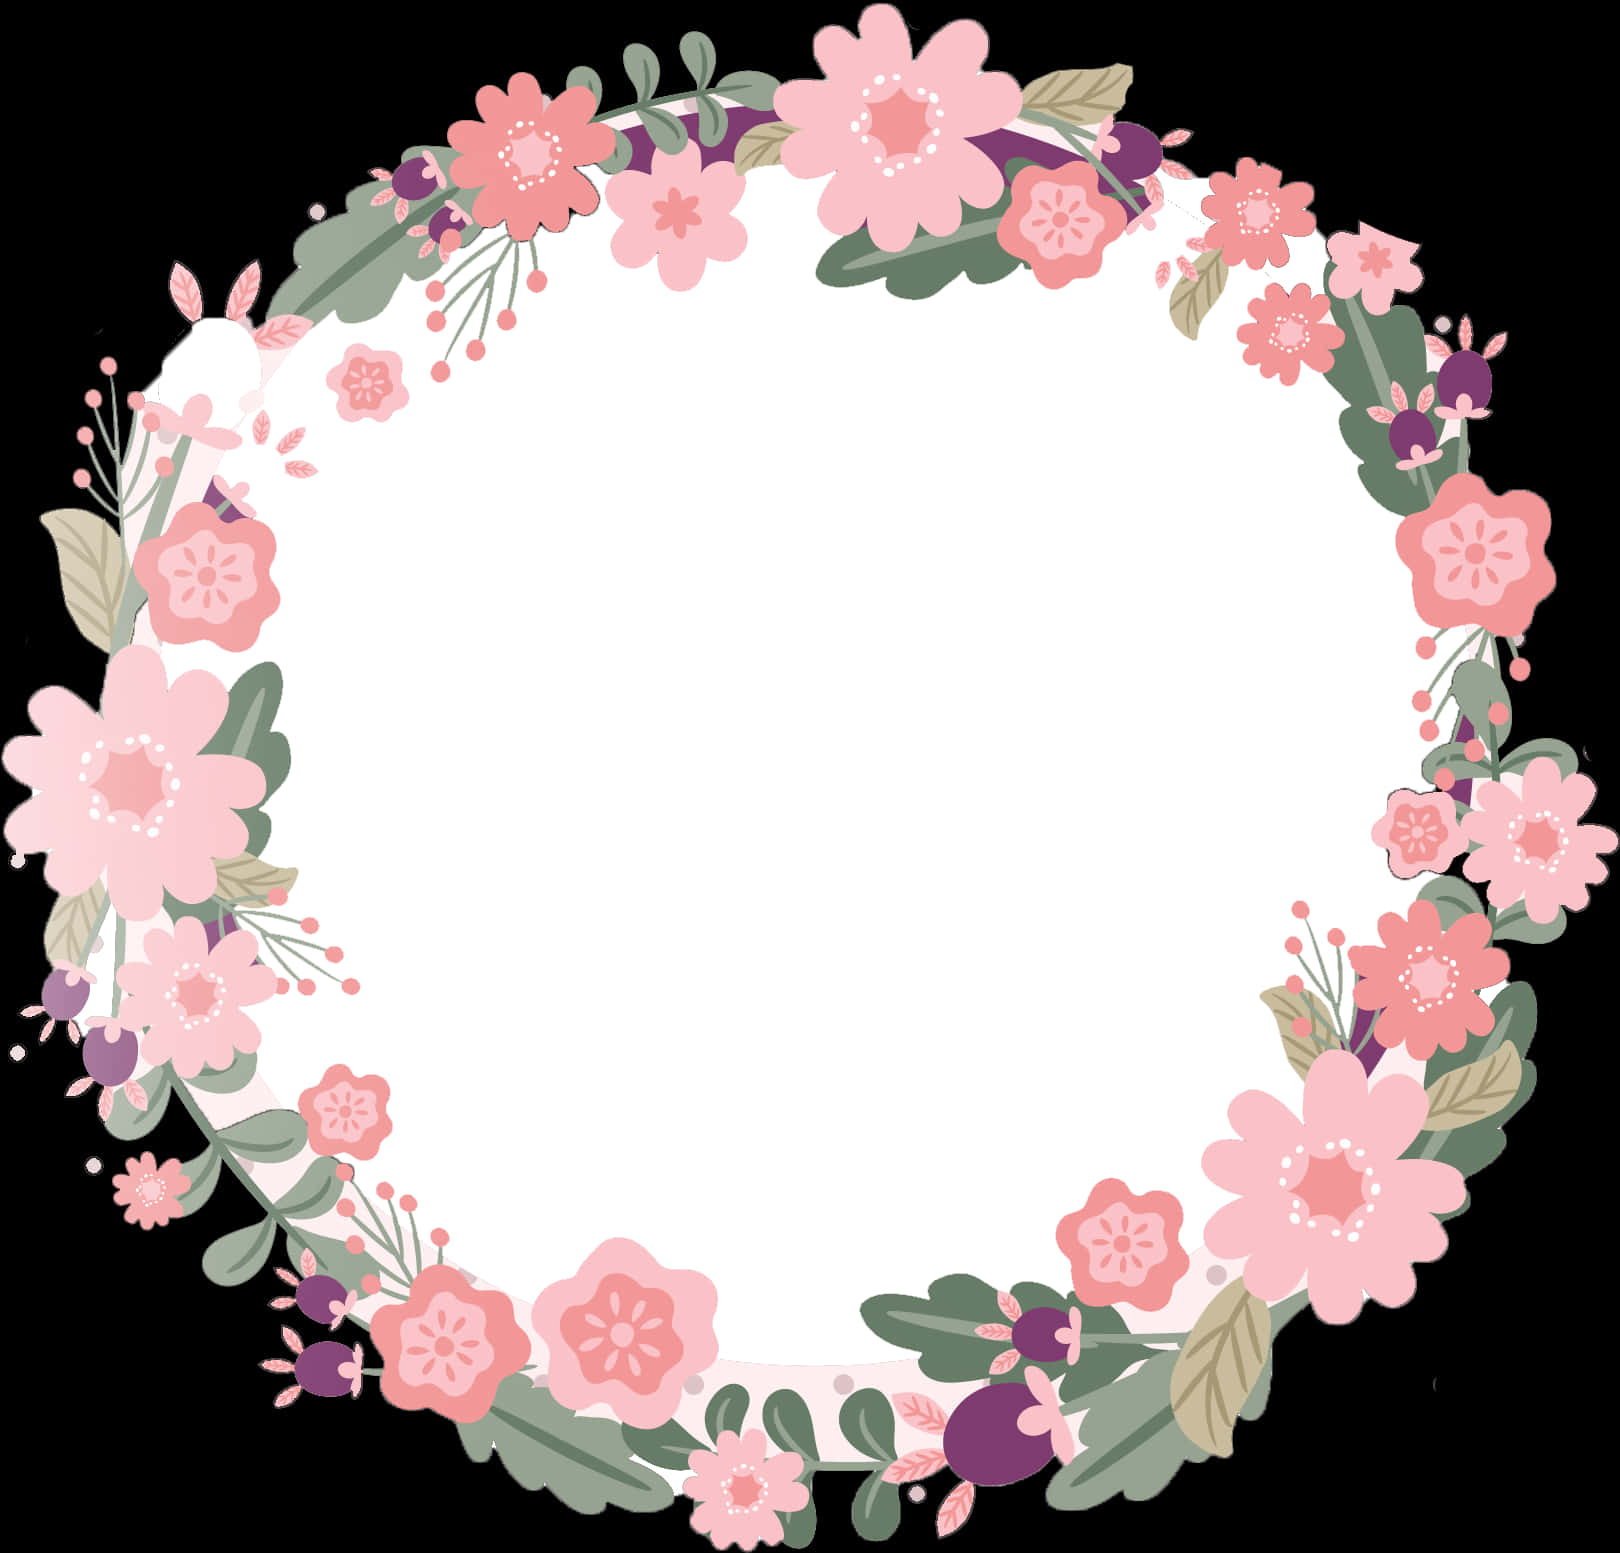 A Round Frame With Pink Flowers And Leaves